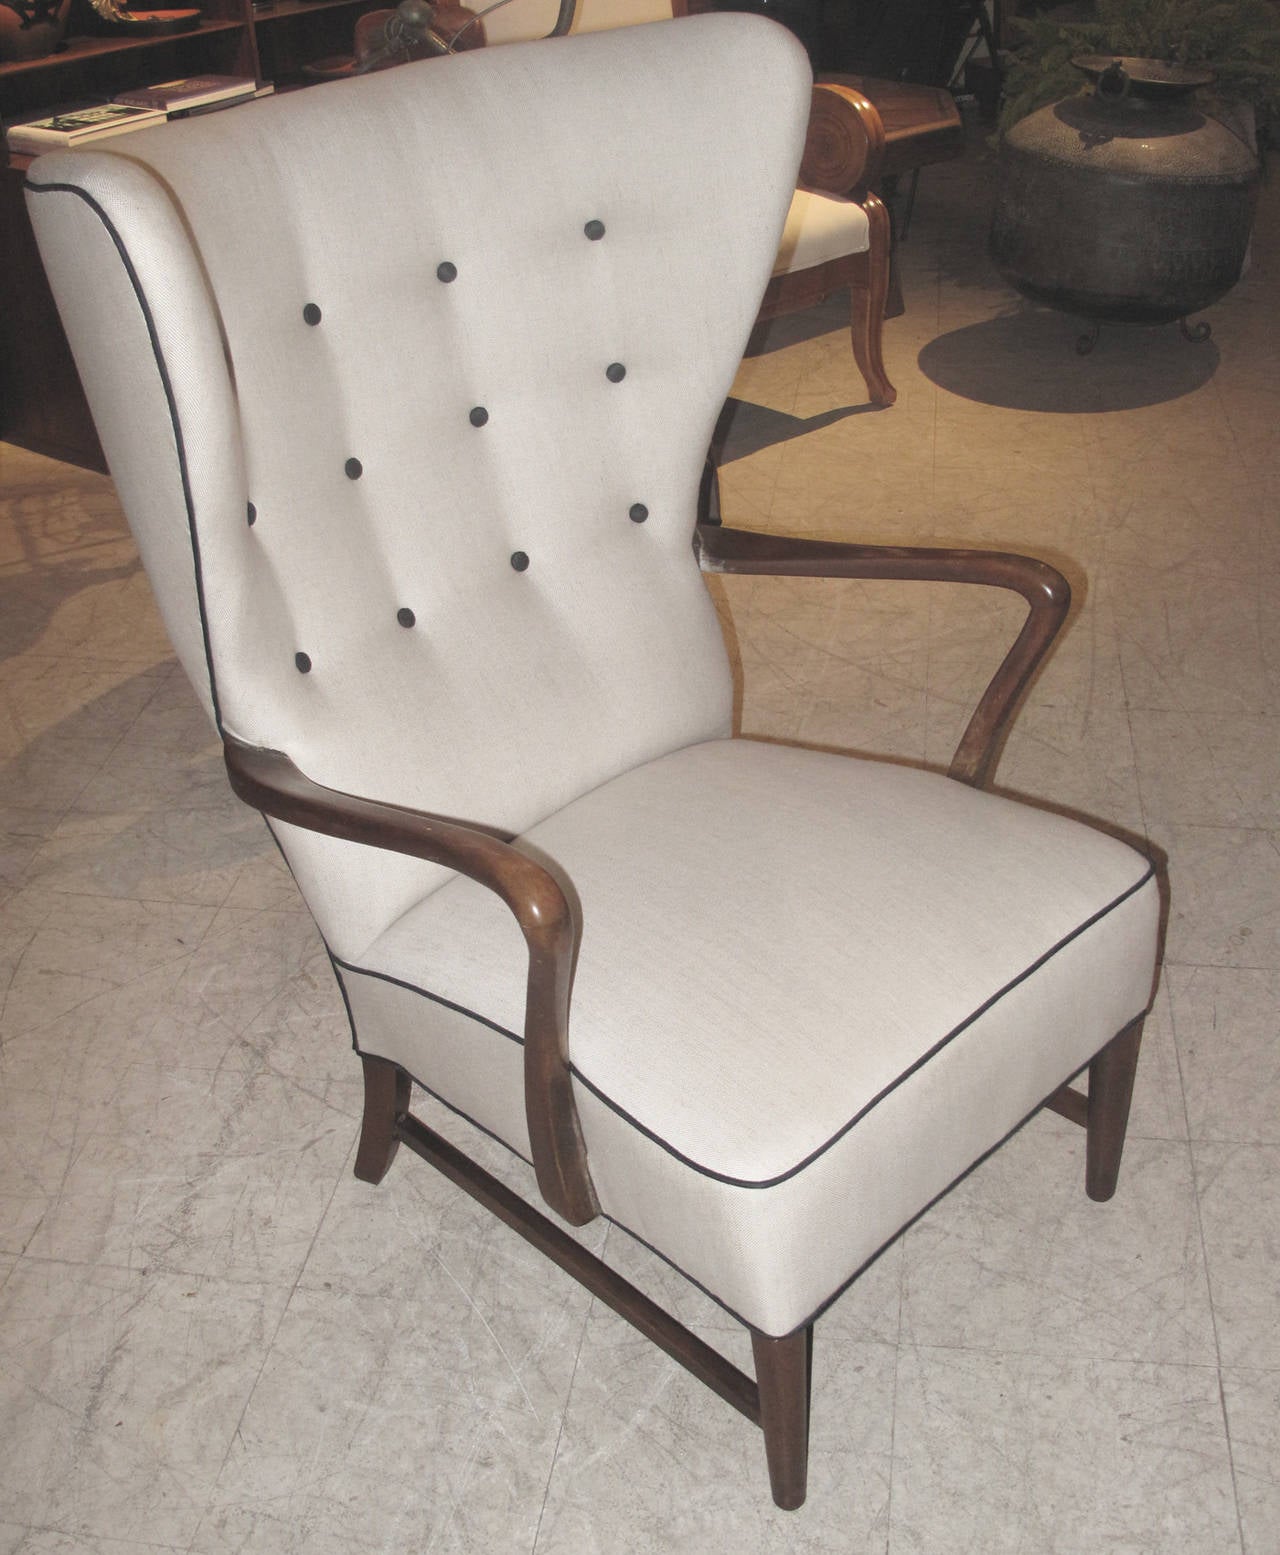 The chair newly upholstered in oatmeal colored linen with black piping and button accents.  The chair's frame of stained beech wood.